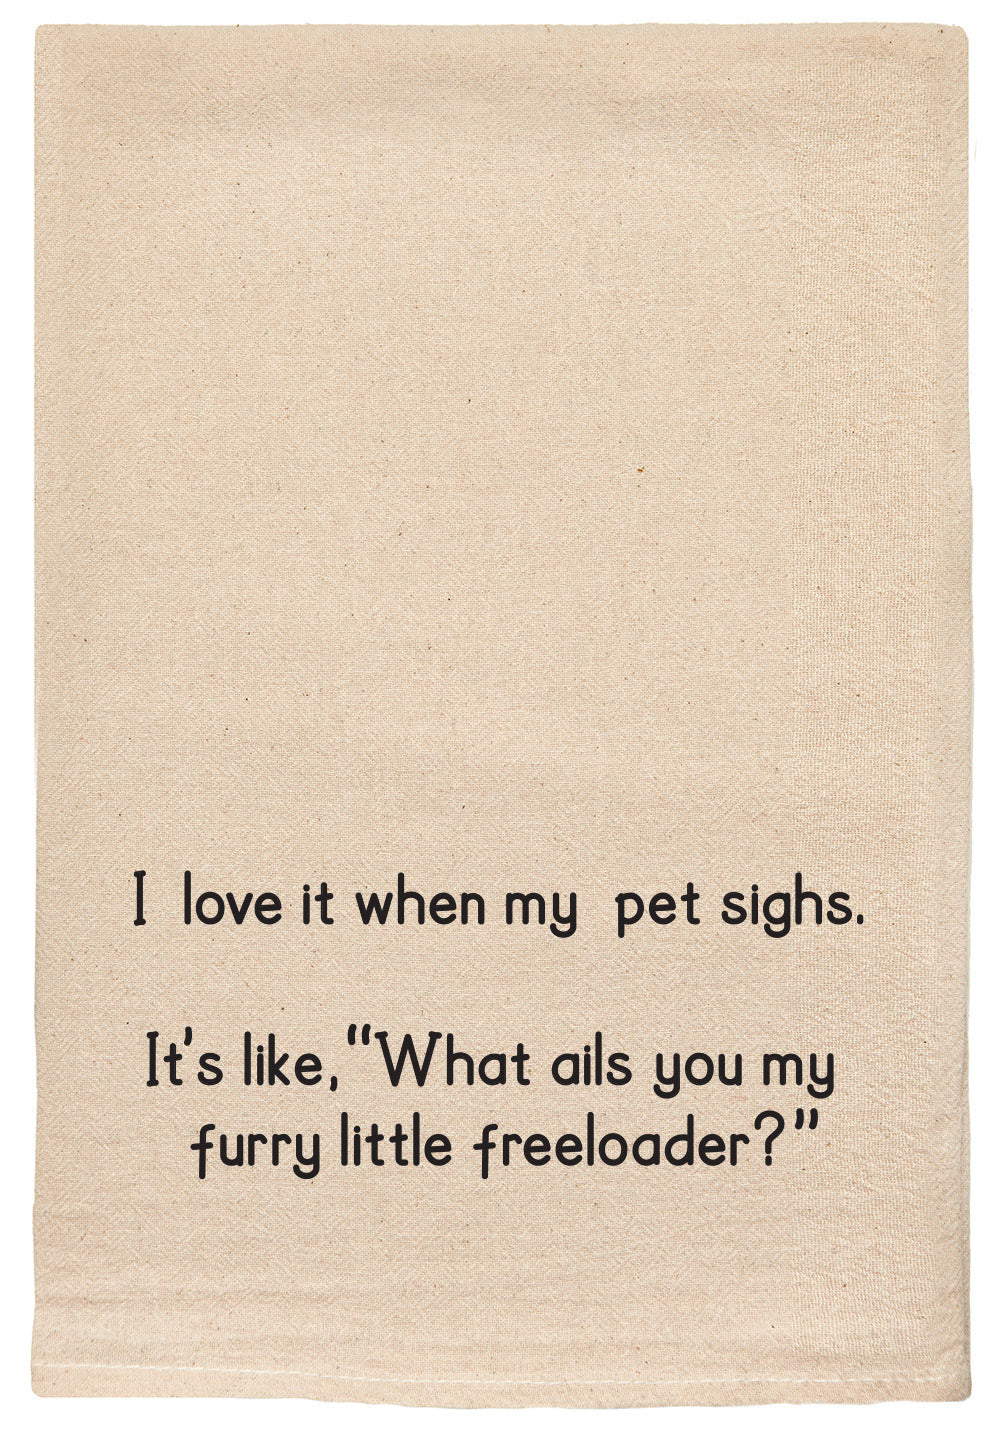 I love it when my pet sighs. It's like, what ails you my furry little freeloader?